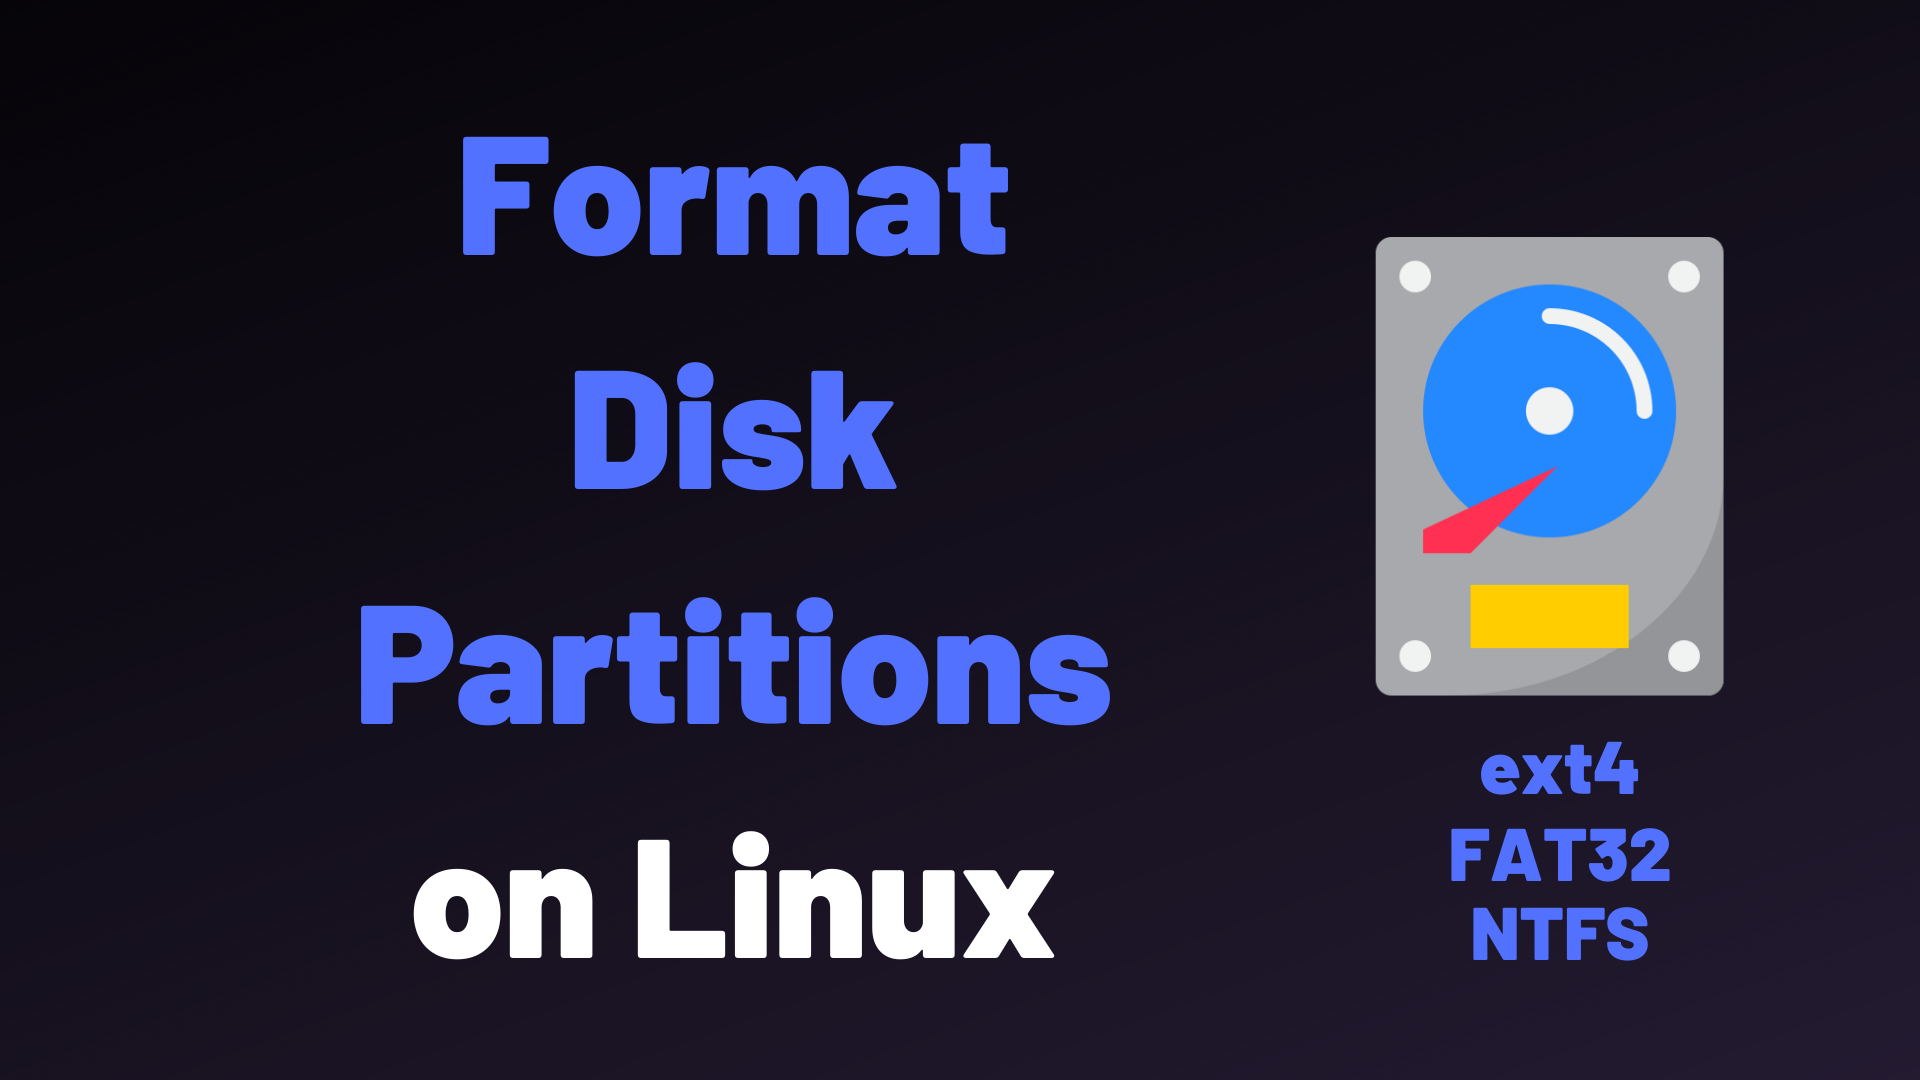 How To Format Disk Partitions on Linux